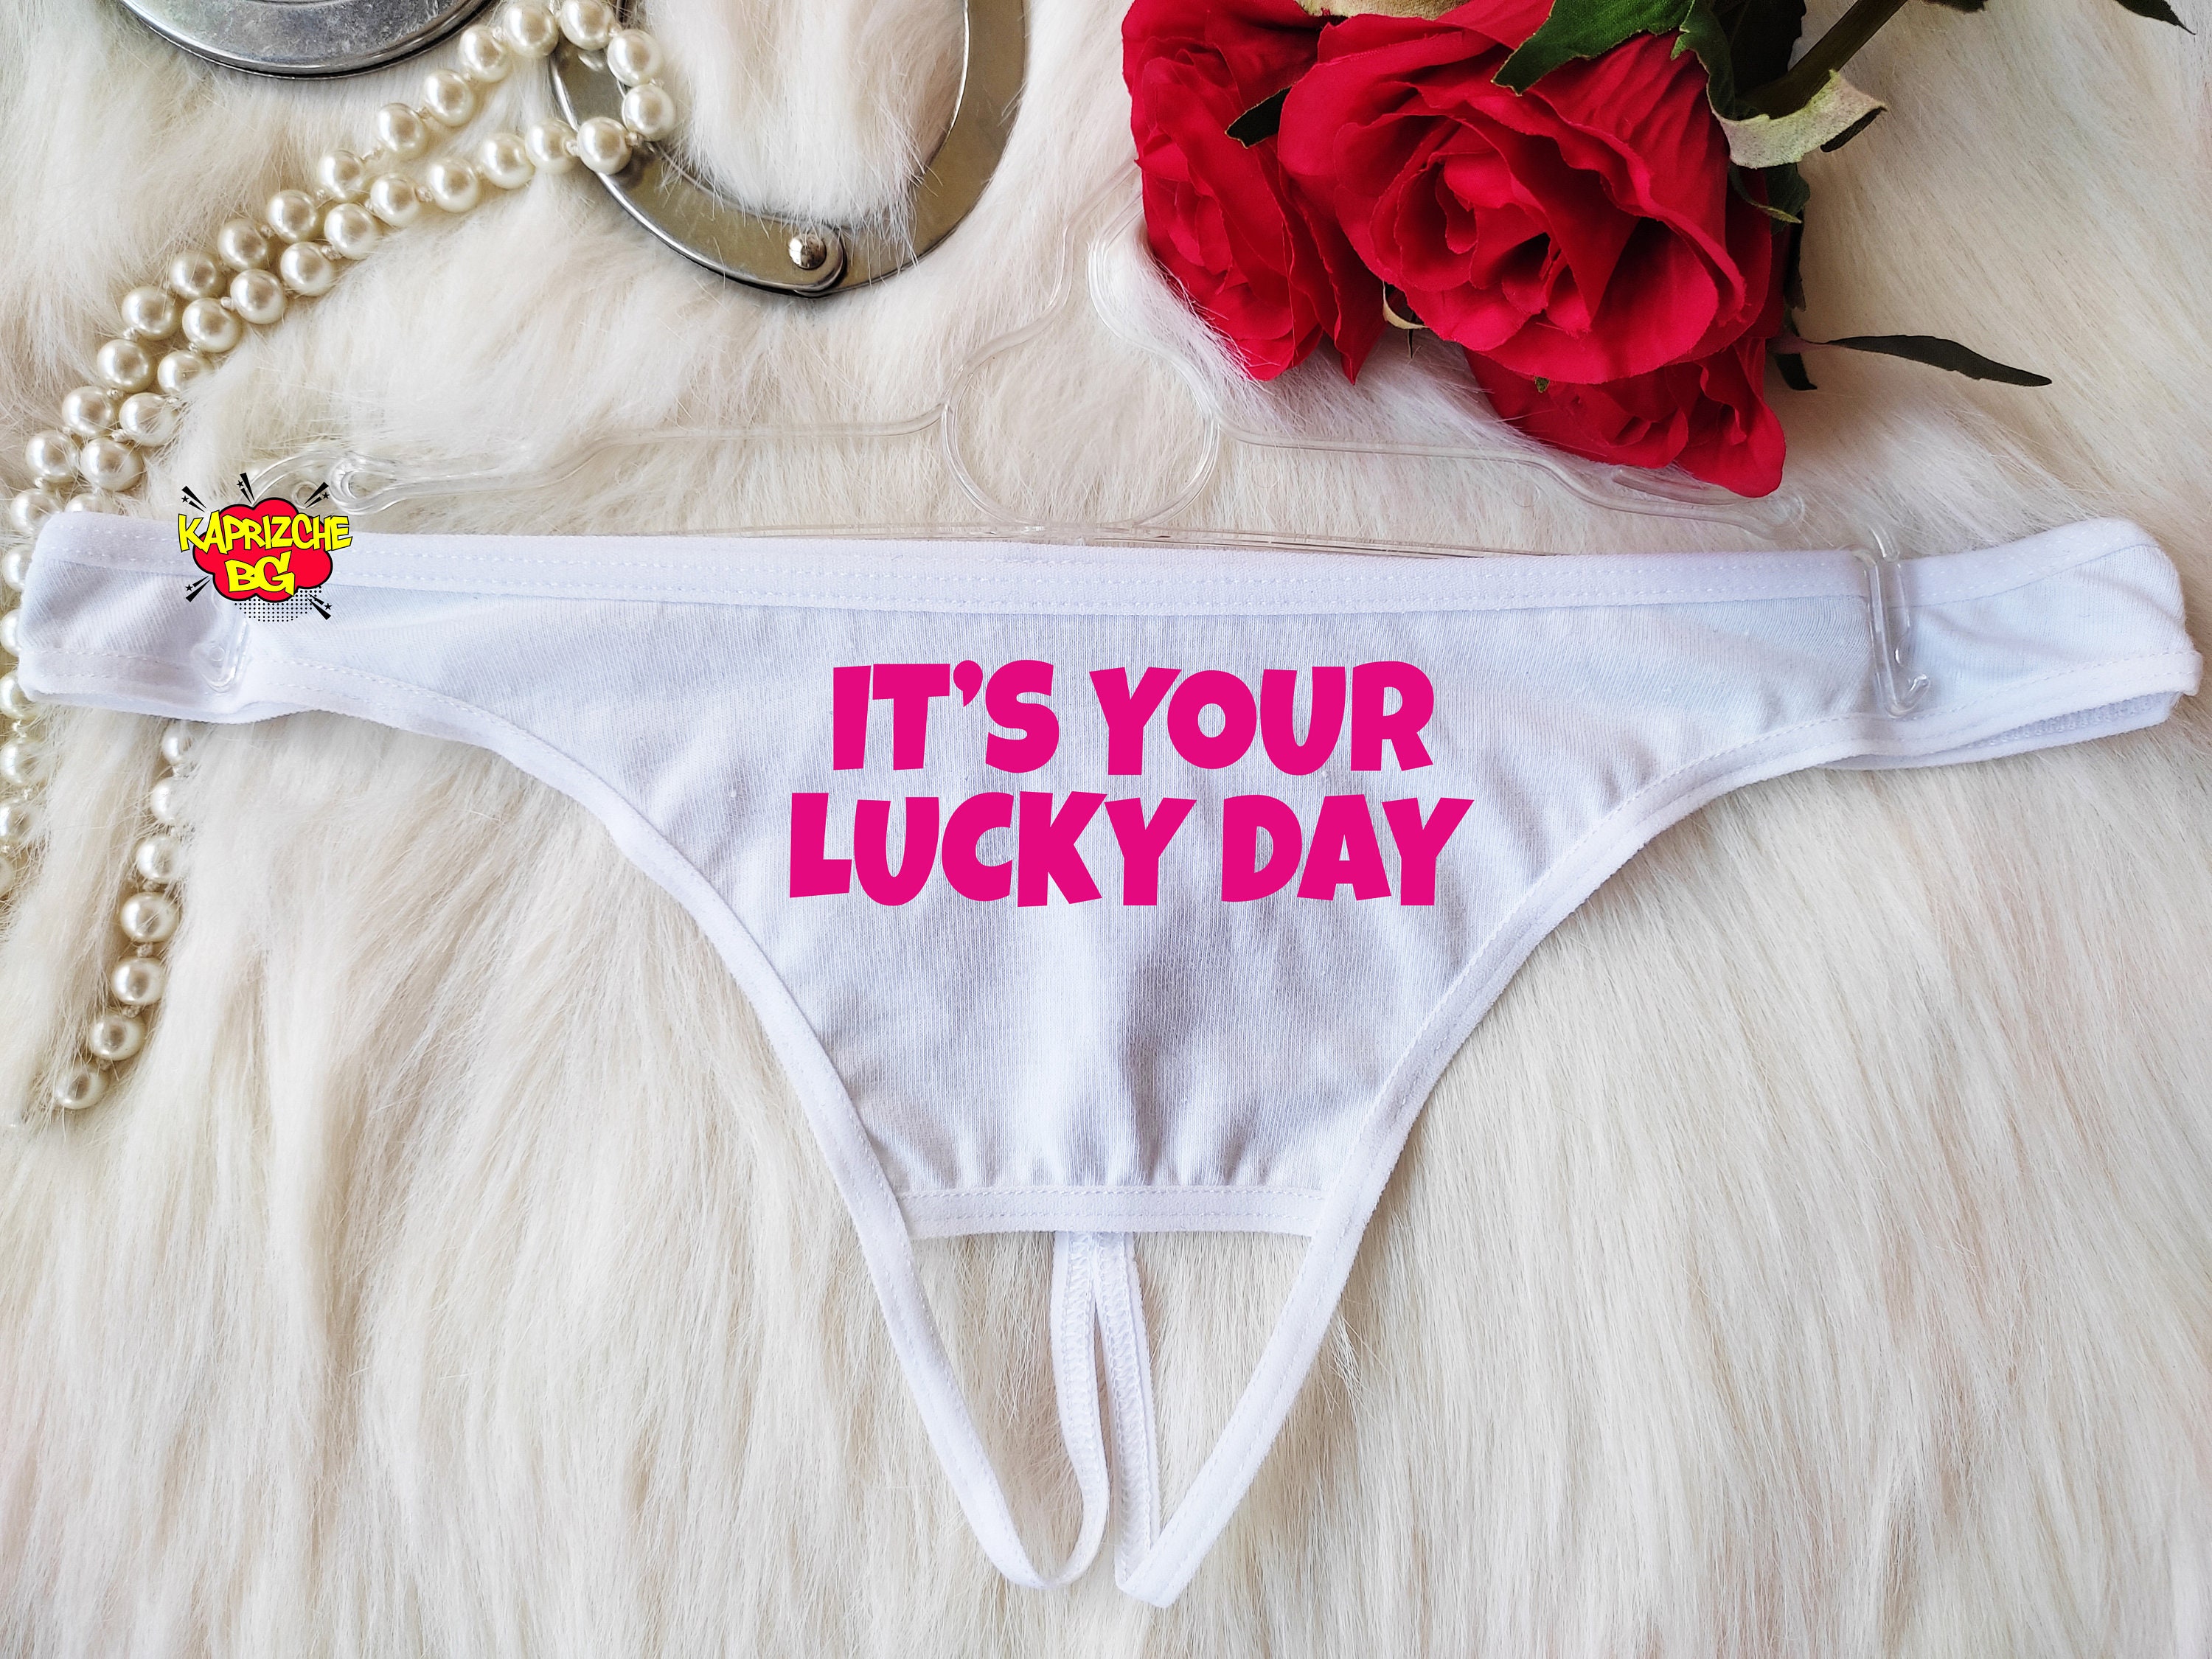 Your Lucky Day Sexy Couple Matching Underwear, Valentines Day Gift, Matching  Underwear Couple Set, His and Hers Underwear, Matching Undies 